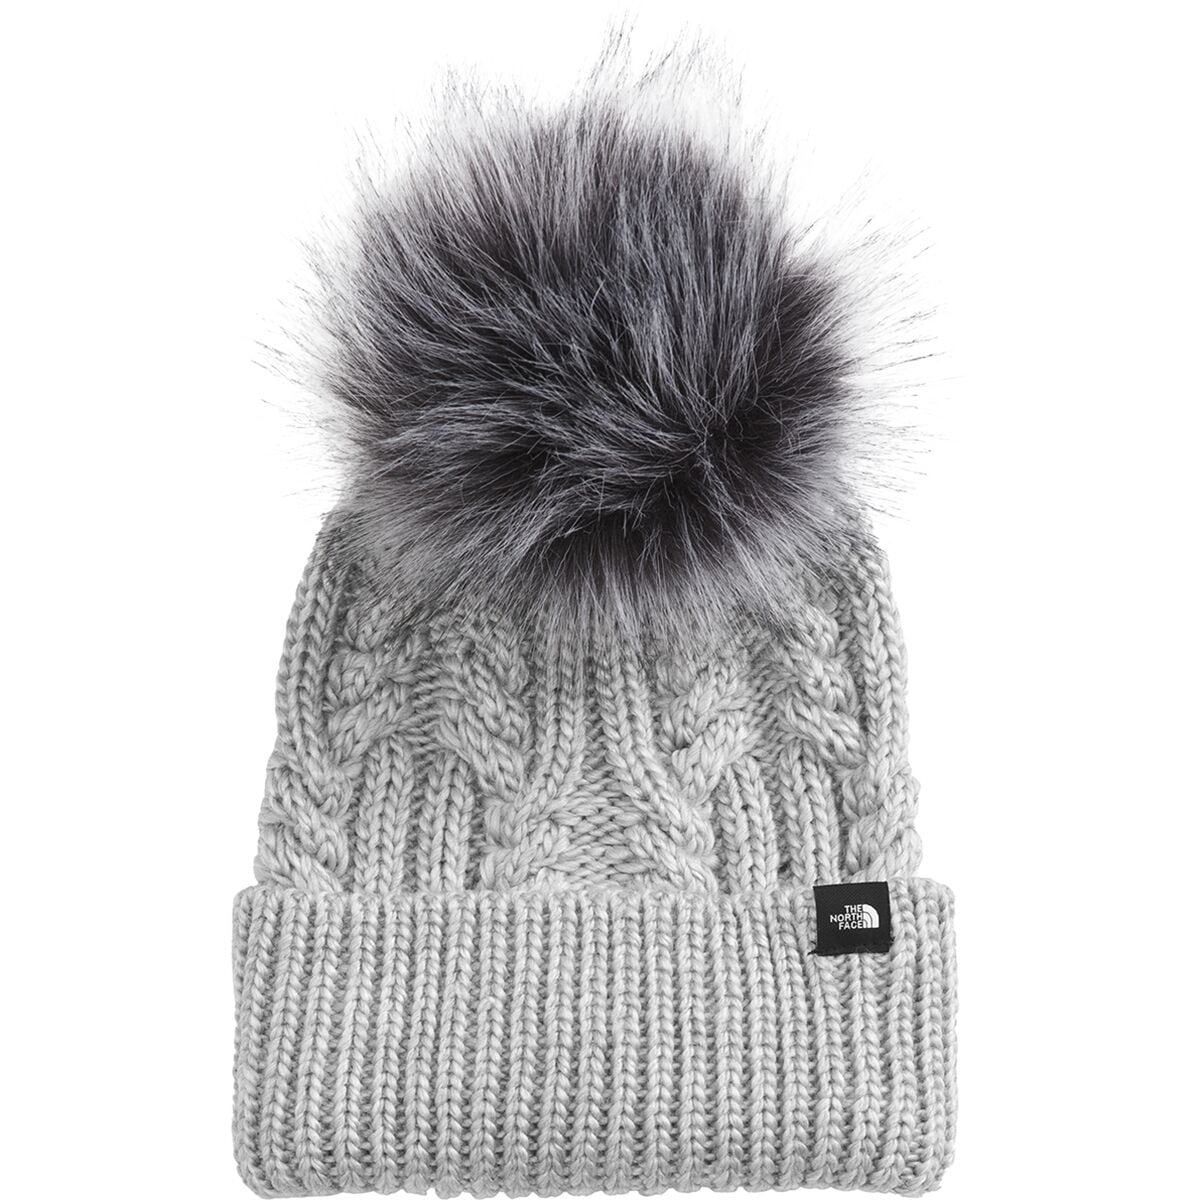 Шапка-бини oh mega fur с помпоном, детская The North Face, серый 10cm fur ball key chain fur pompoms hat winter hats fur pom pom for shoes bag accessories with buttons